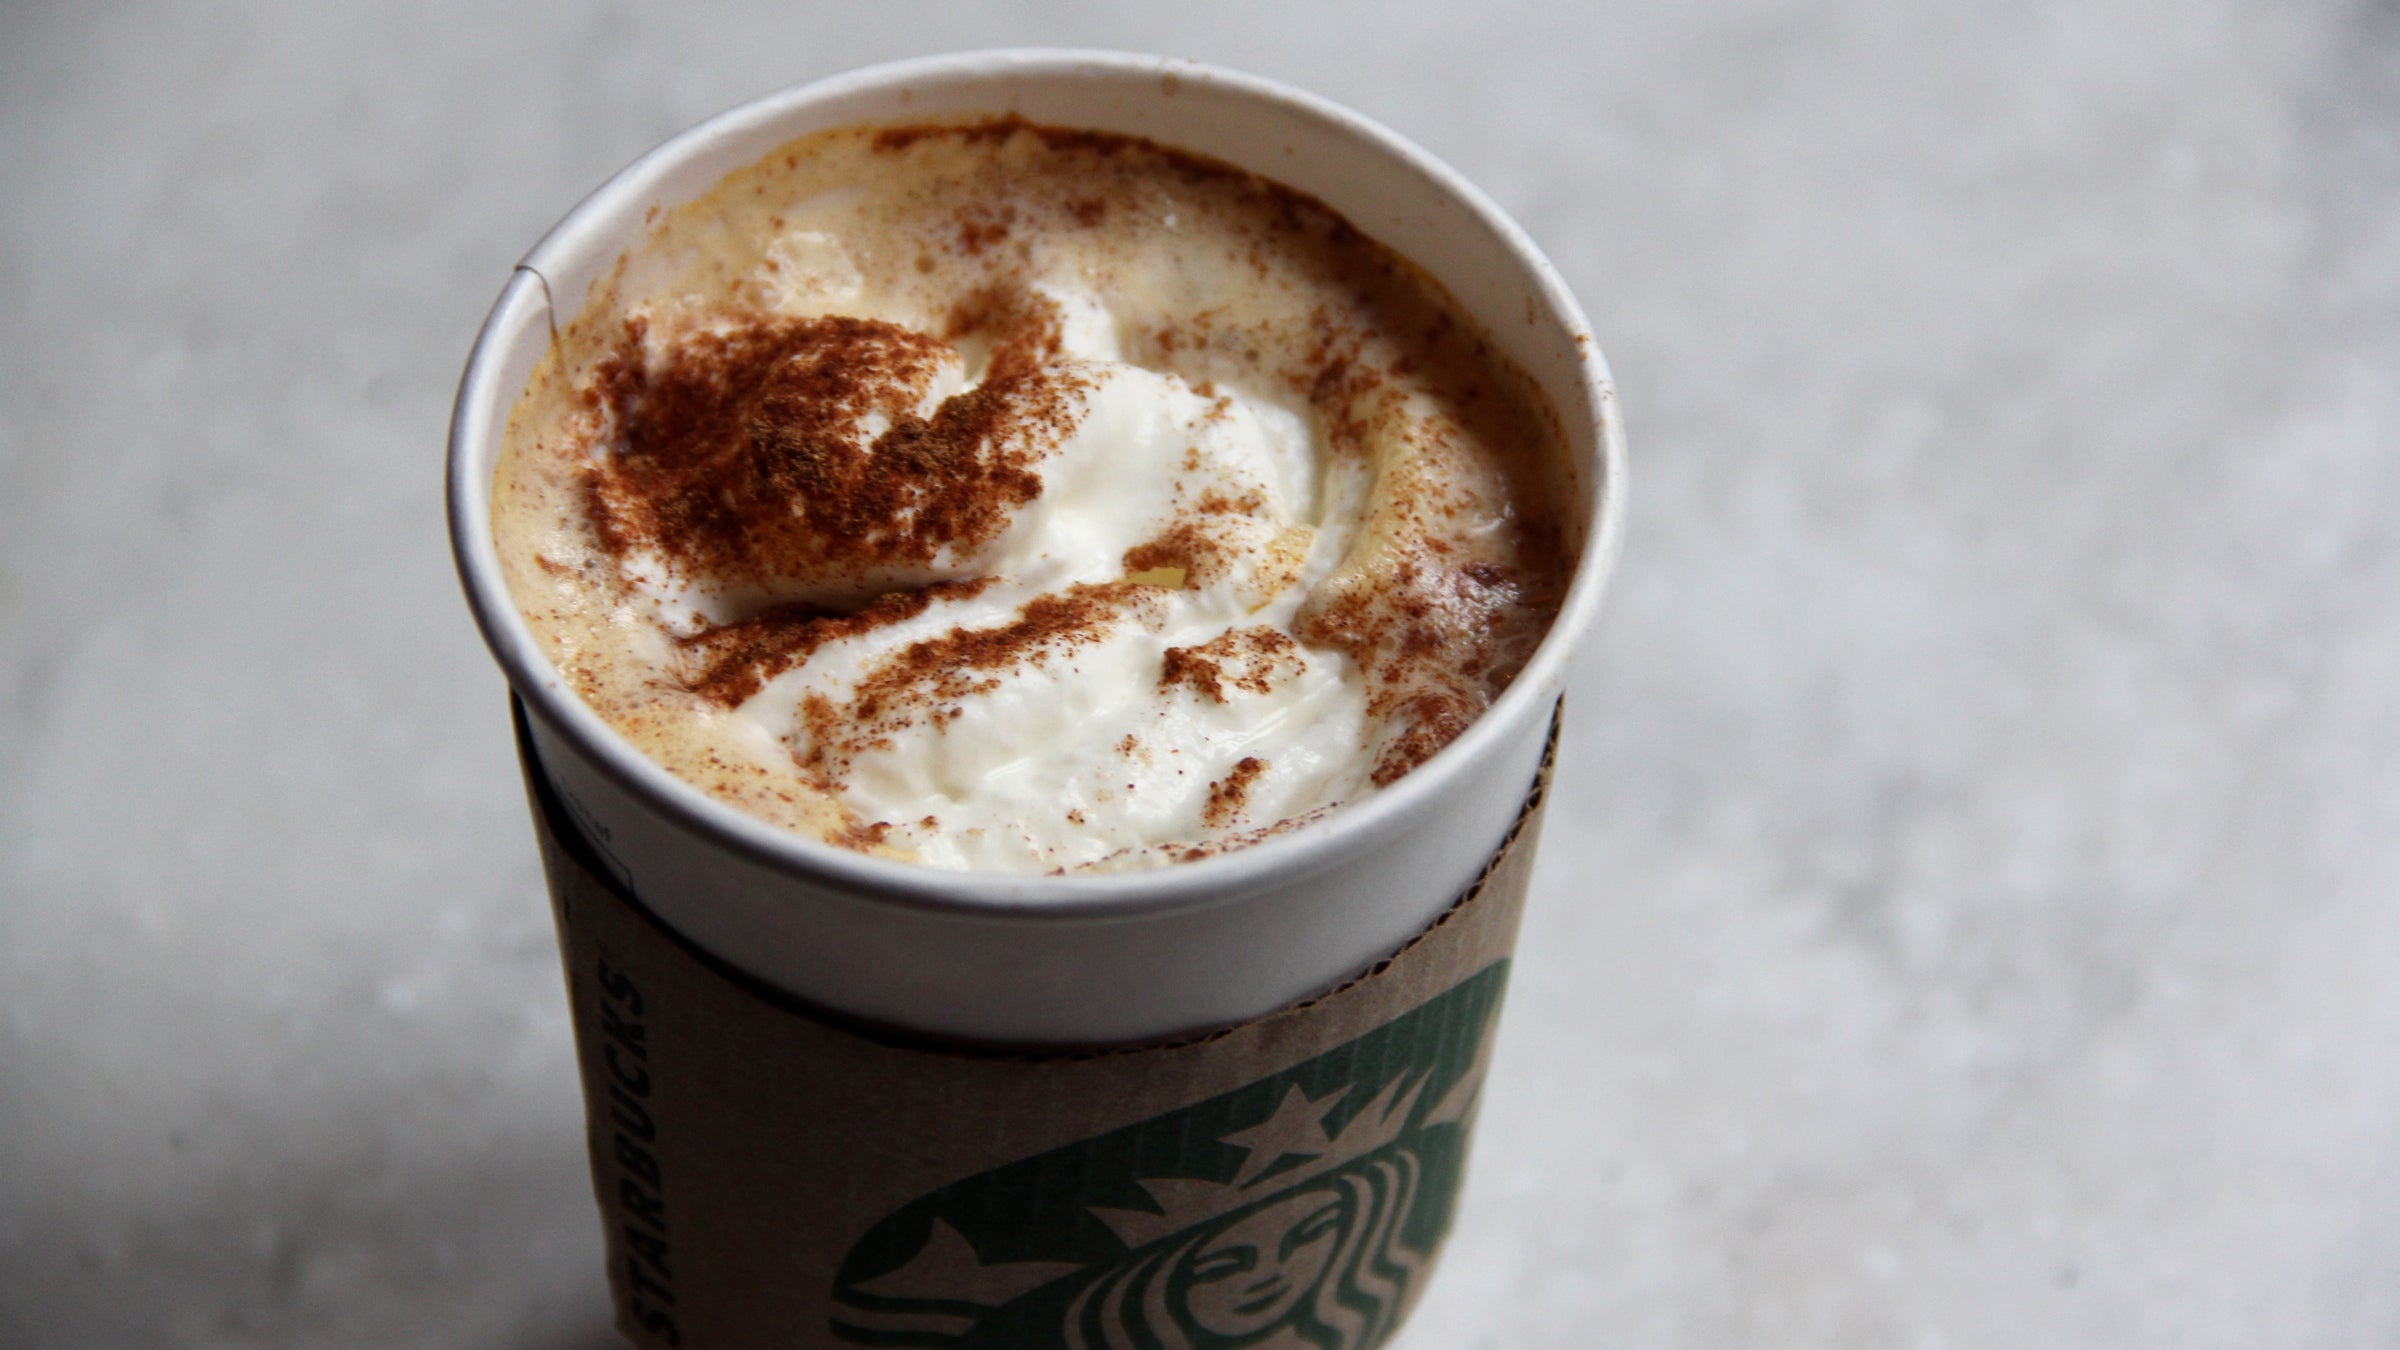 Starbucks has sold hundreds of millions of Pumpkin Spice Lattes since their introduction in 2003. (Emma Lee/WHYY)